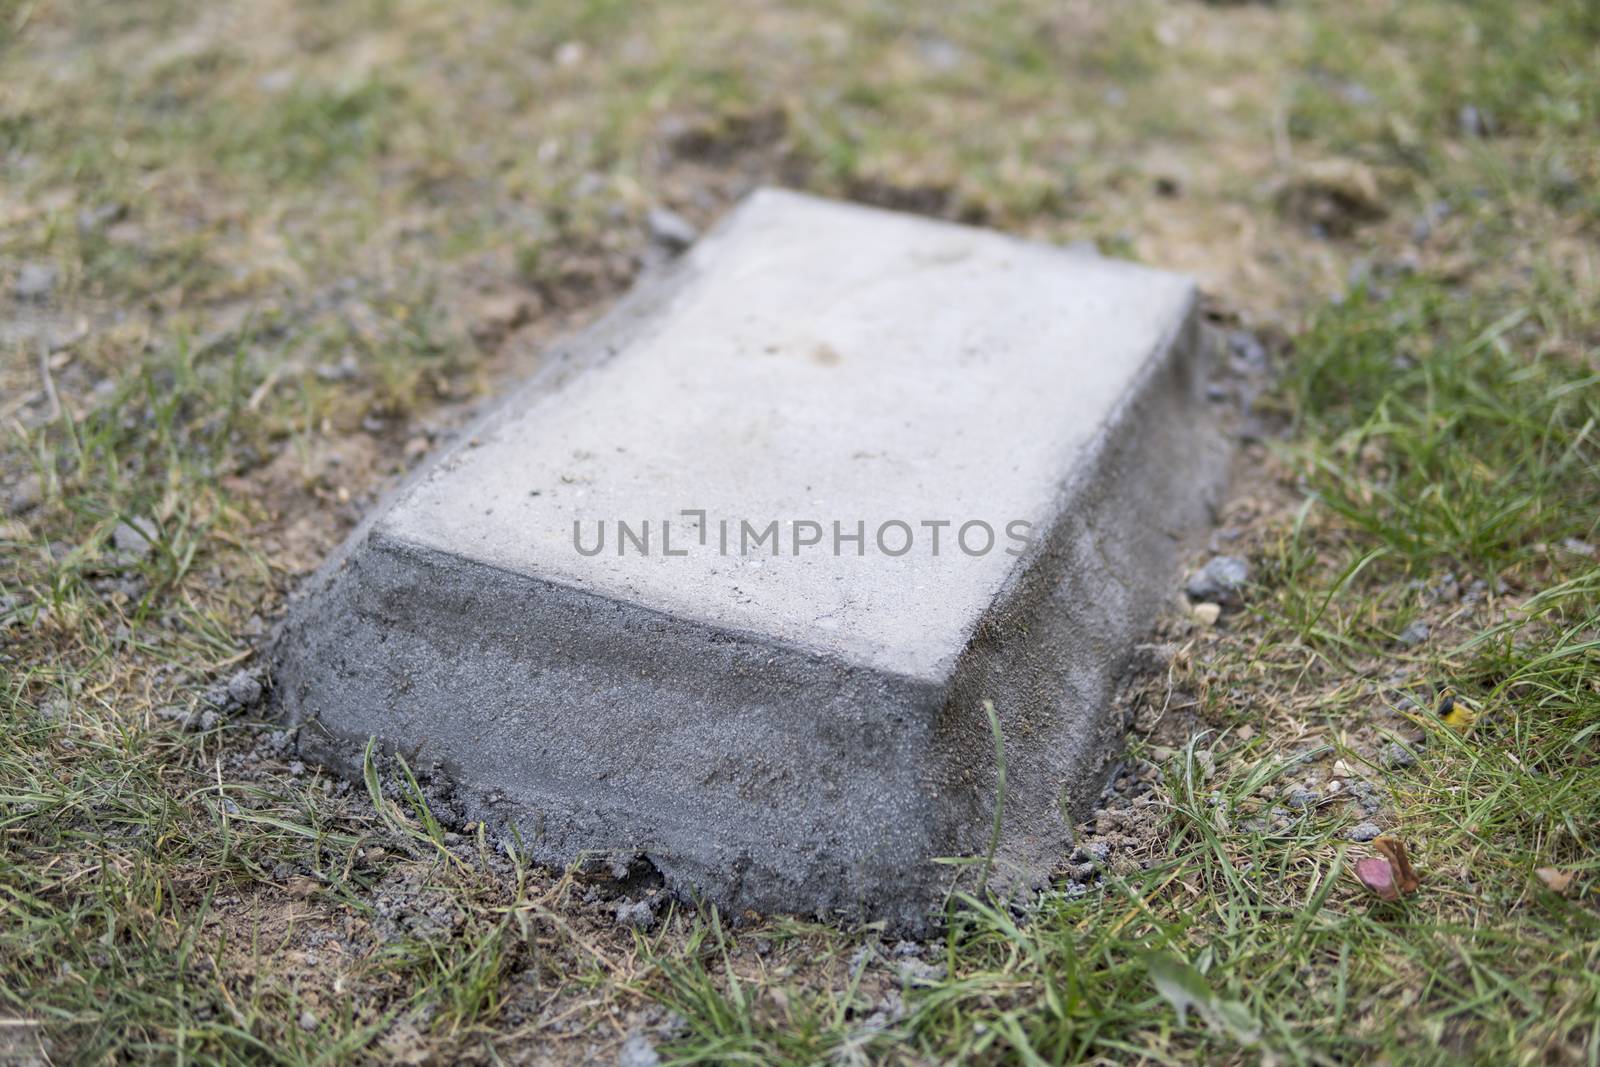 concrete block embeded on a ground surrounded by grass